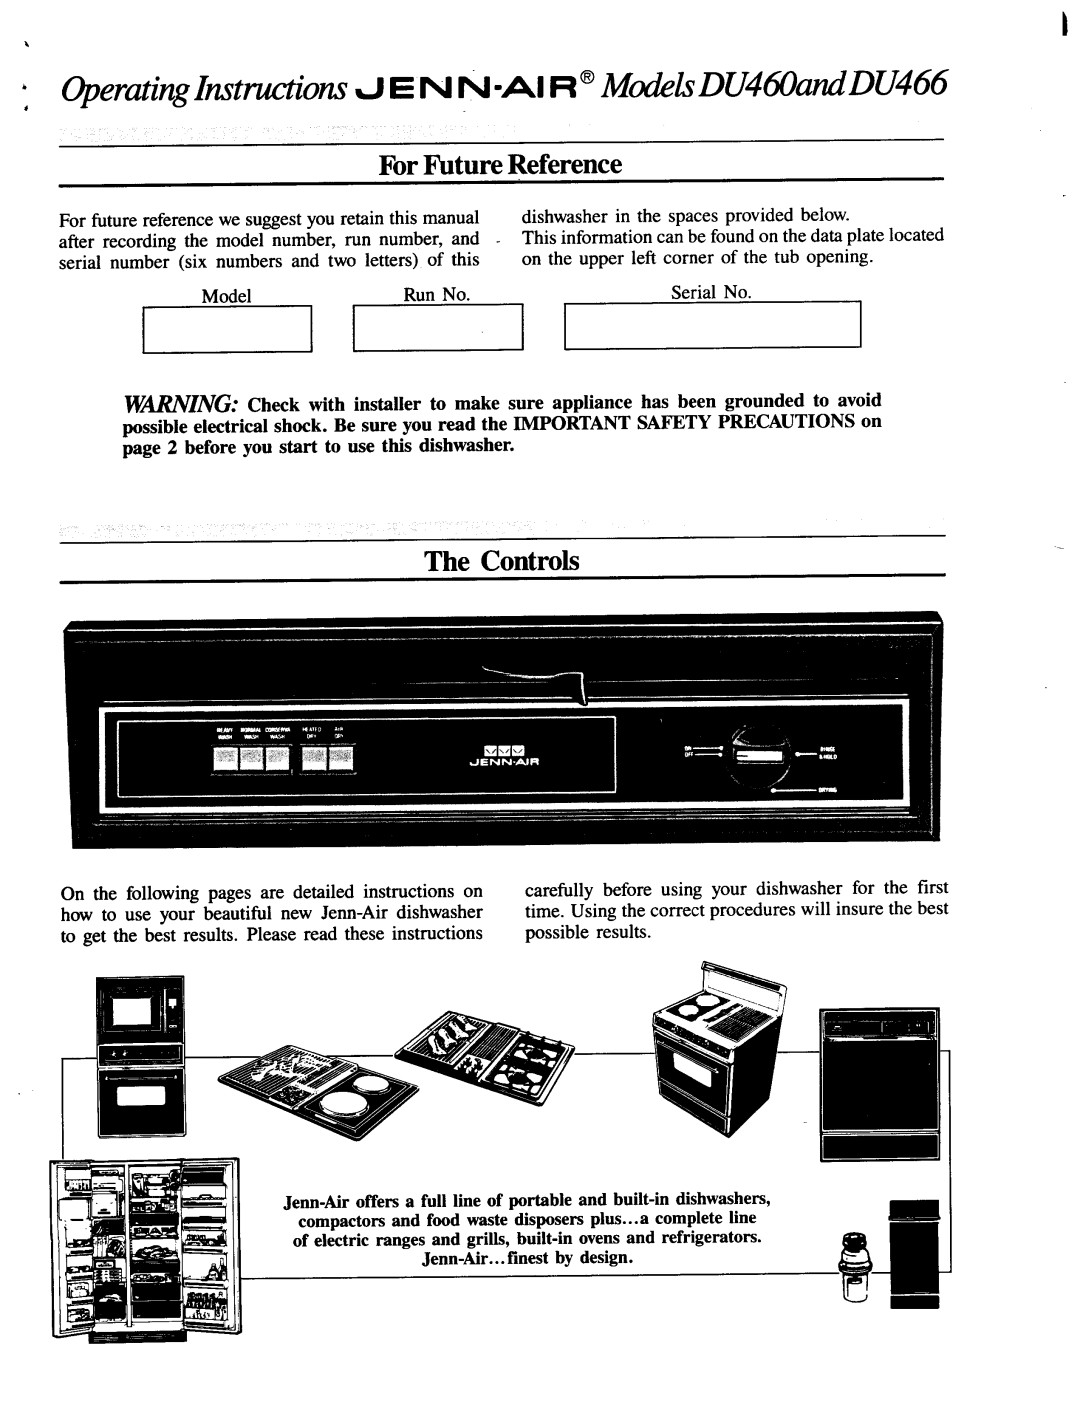 Jenn-Air DU460, DU466 operating instructions For Future Reference, The Controls 